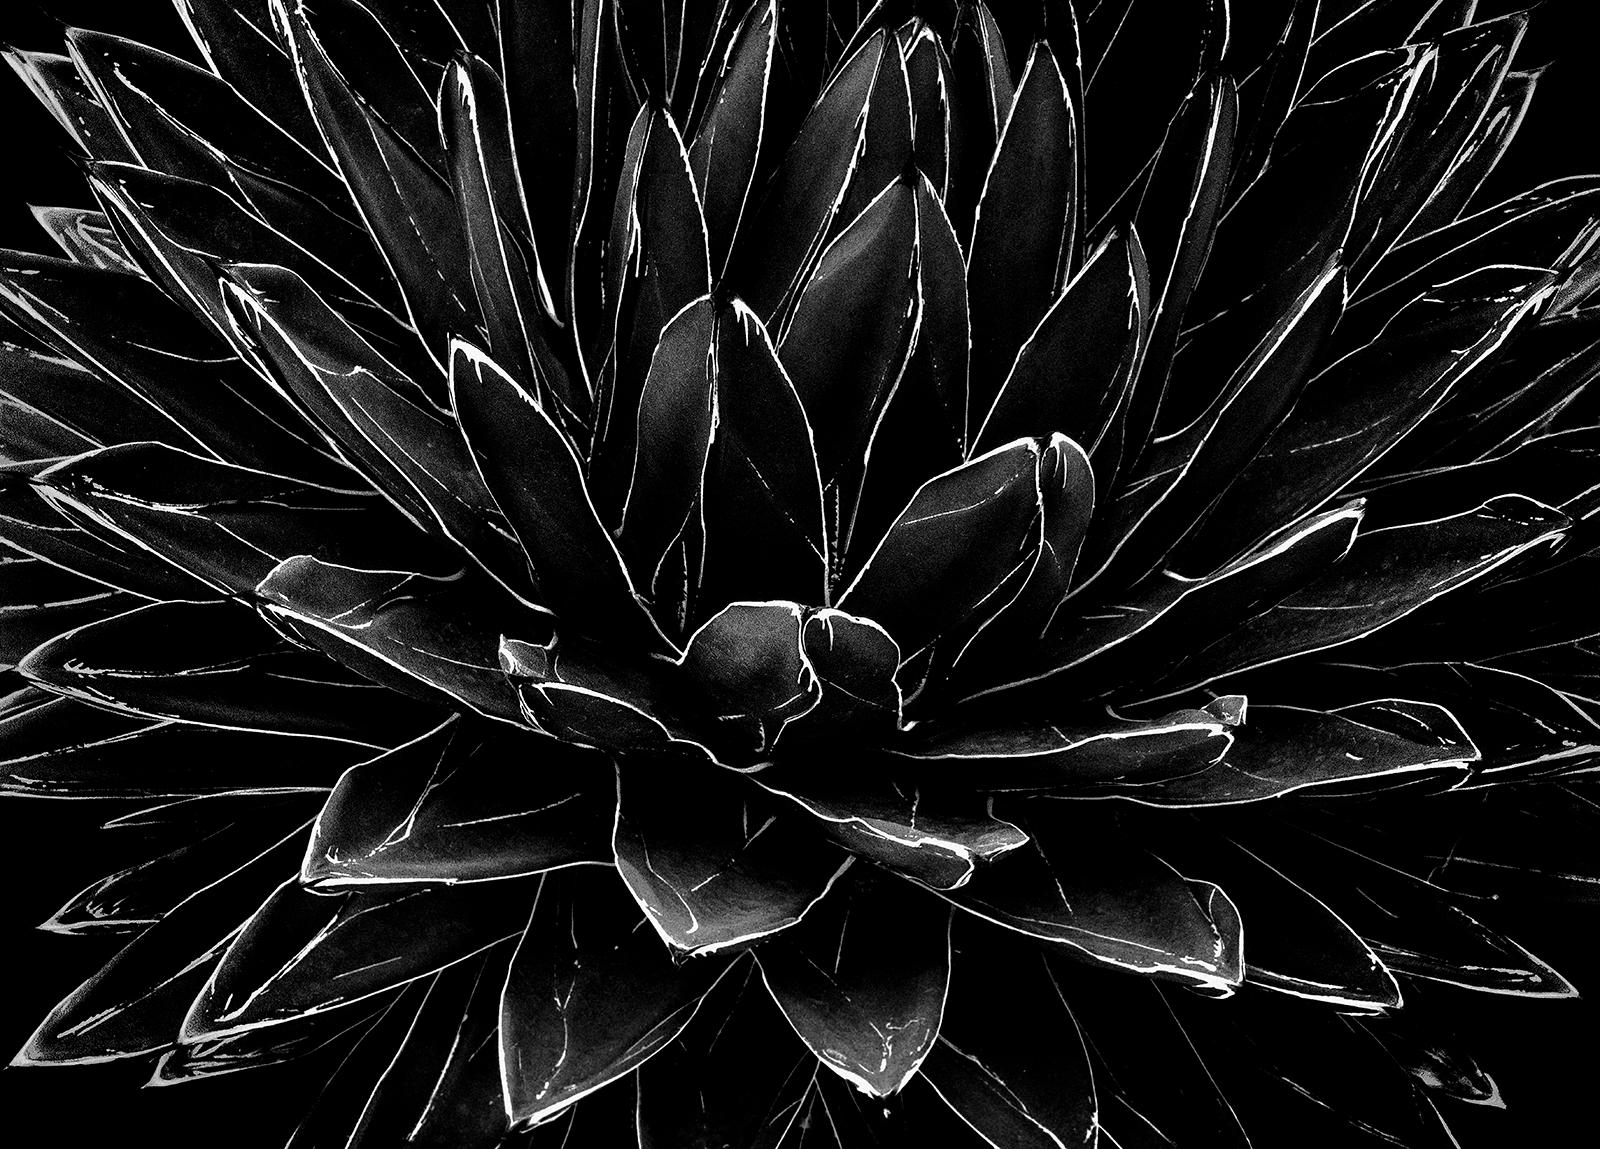 Cactus-Signed limited edition still life print, Black white nature, Contemporary